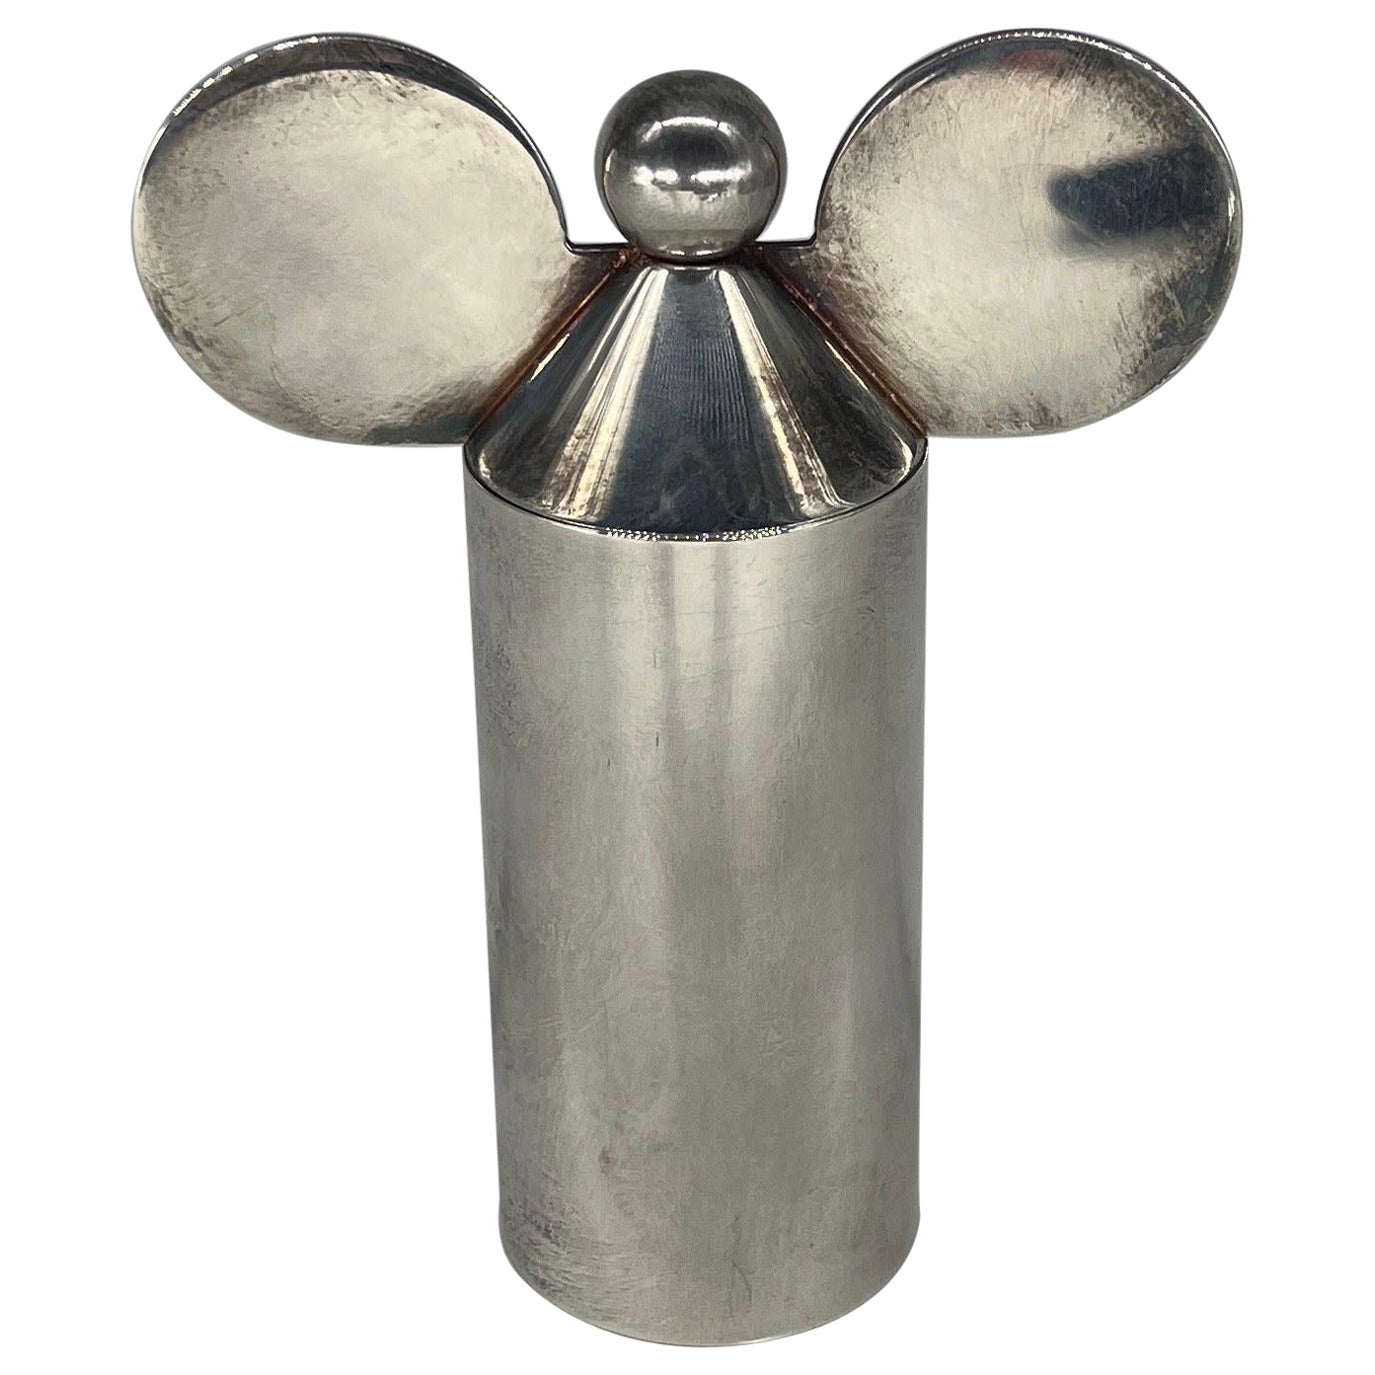 Haussmann Swid Powell "Mickey Mouse" Silver Plated Pepper Mill Grinder C. 1987 For Sale